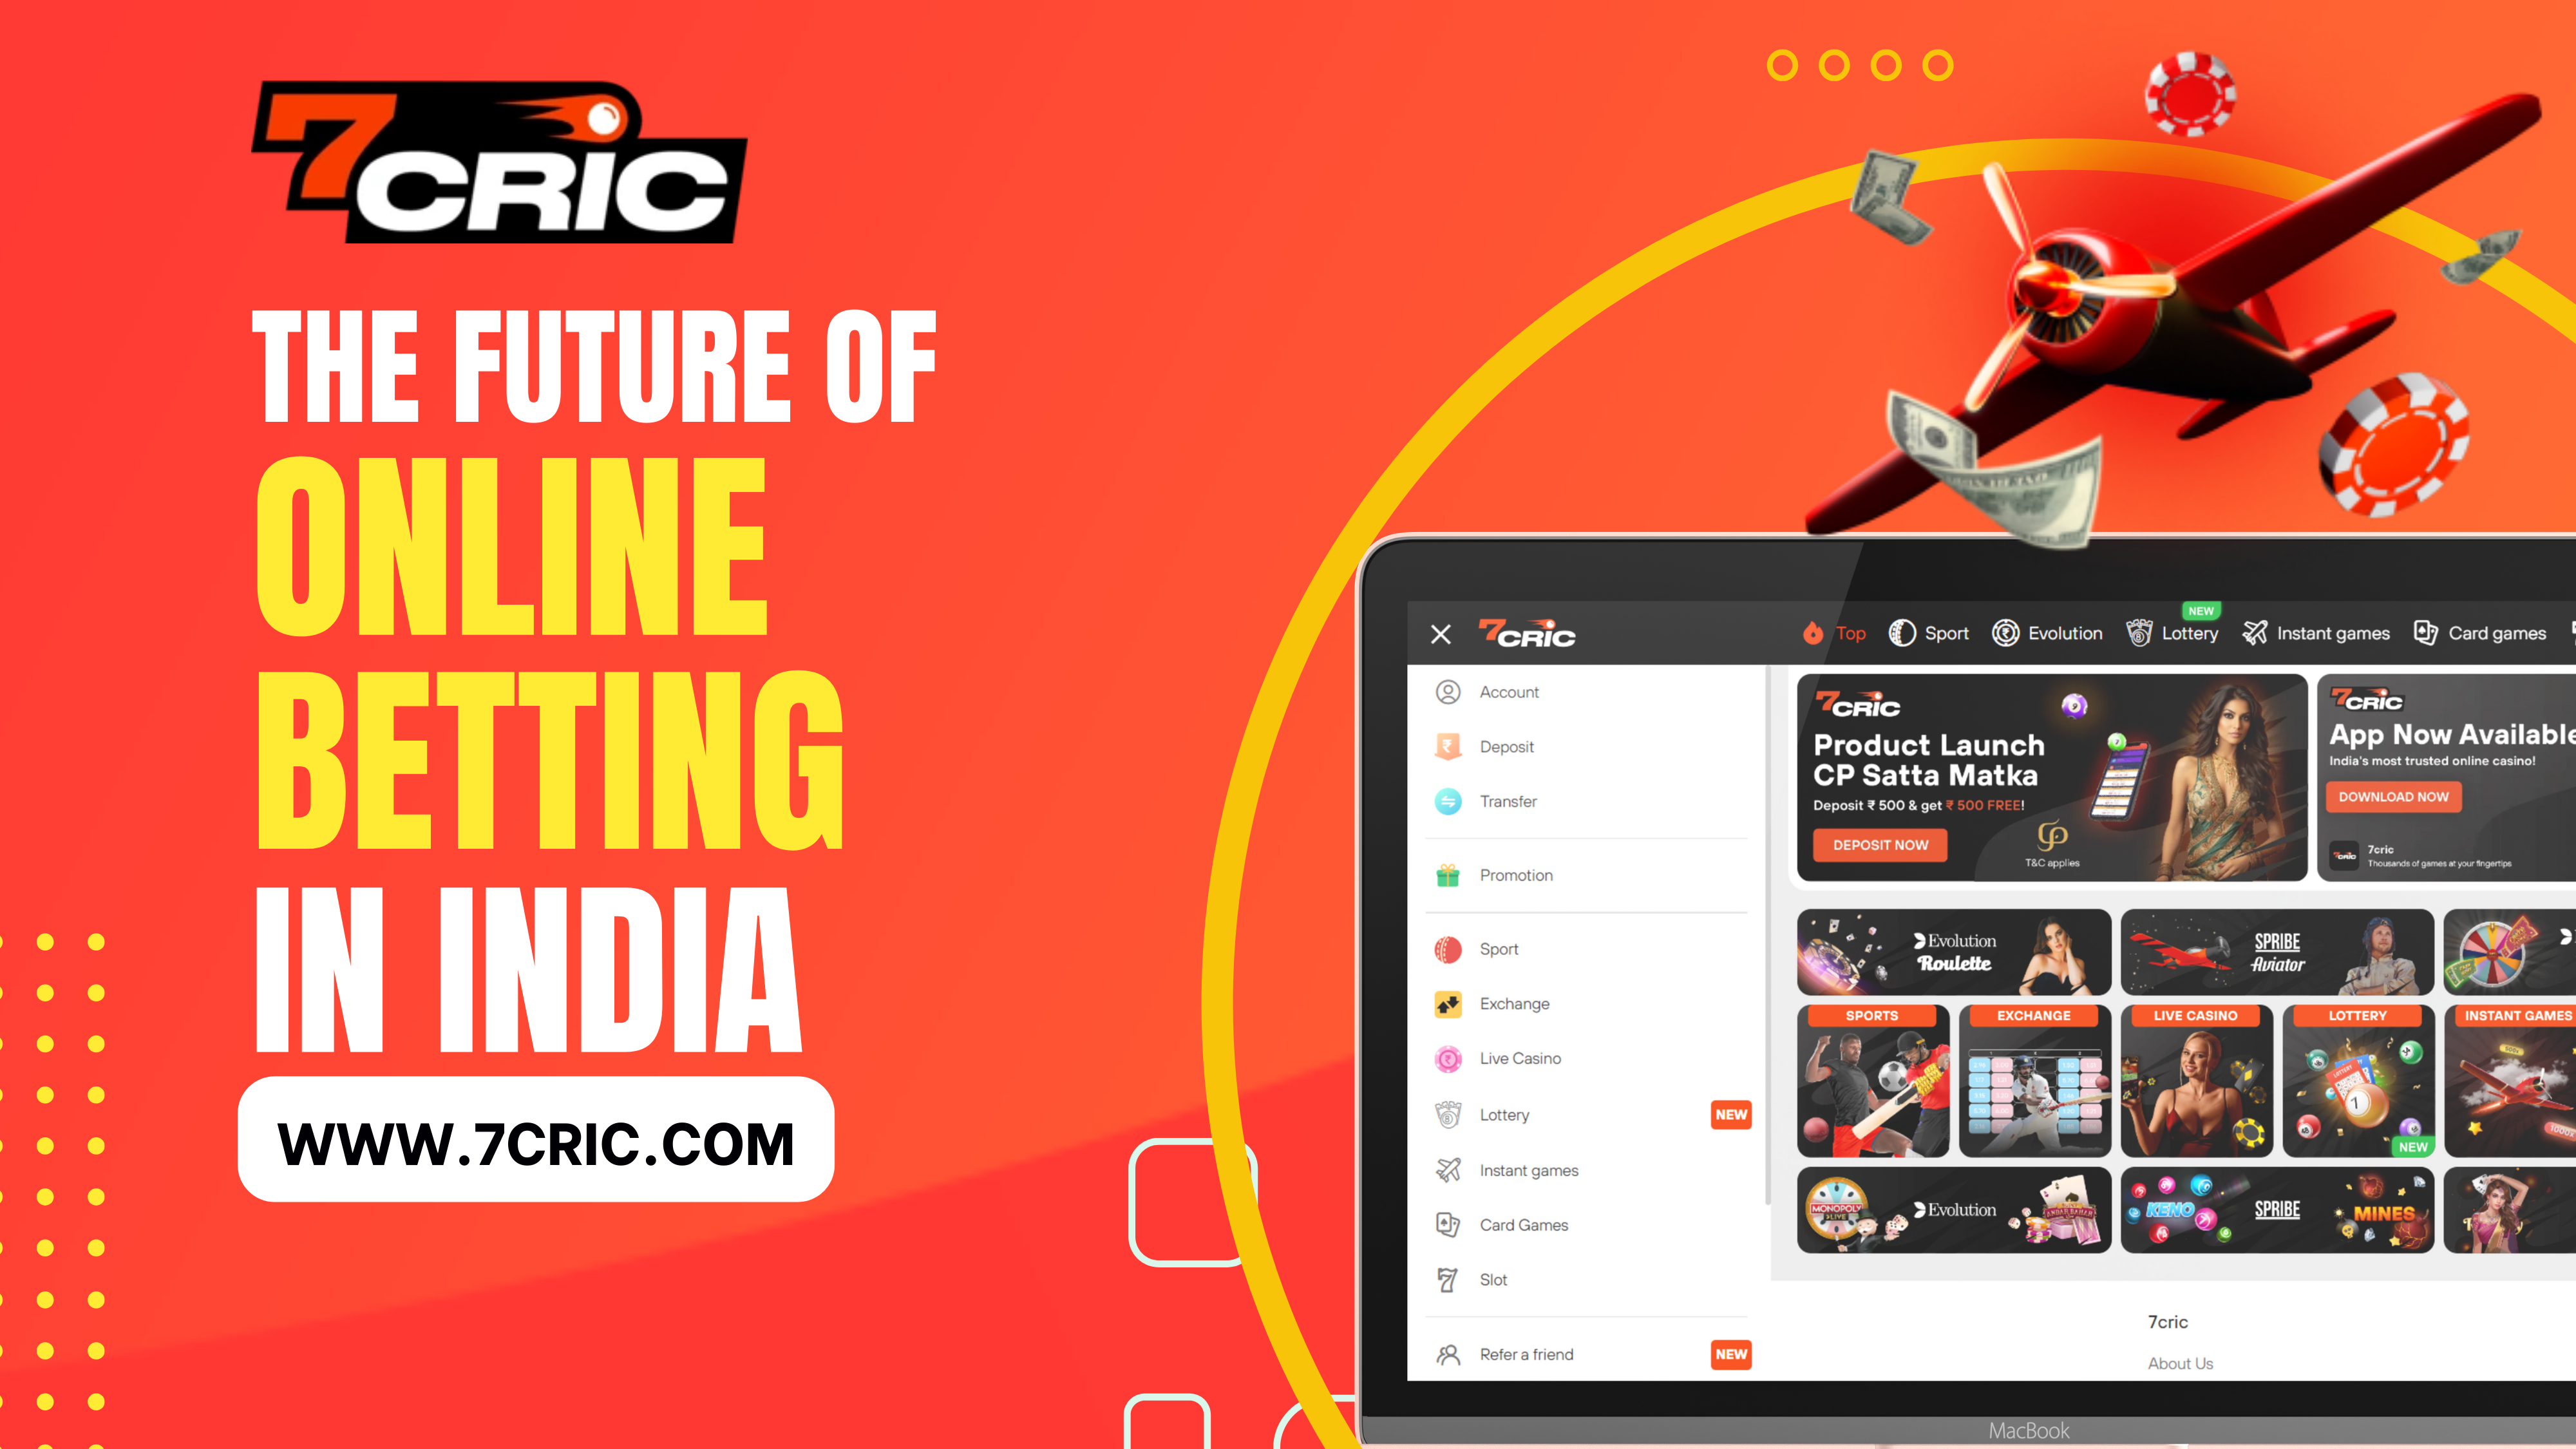 Post Betway & bet365 Exits: 7cric, The Future Of Online Betting In India